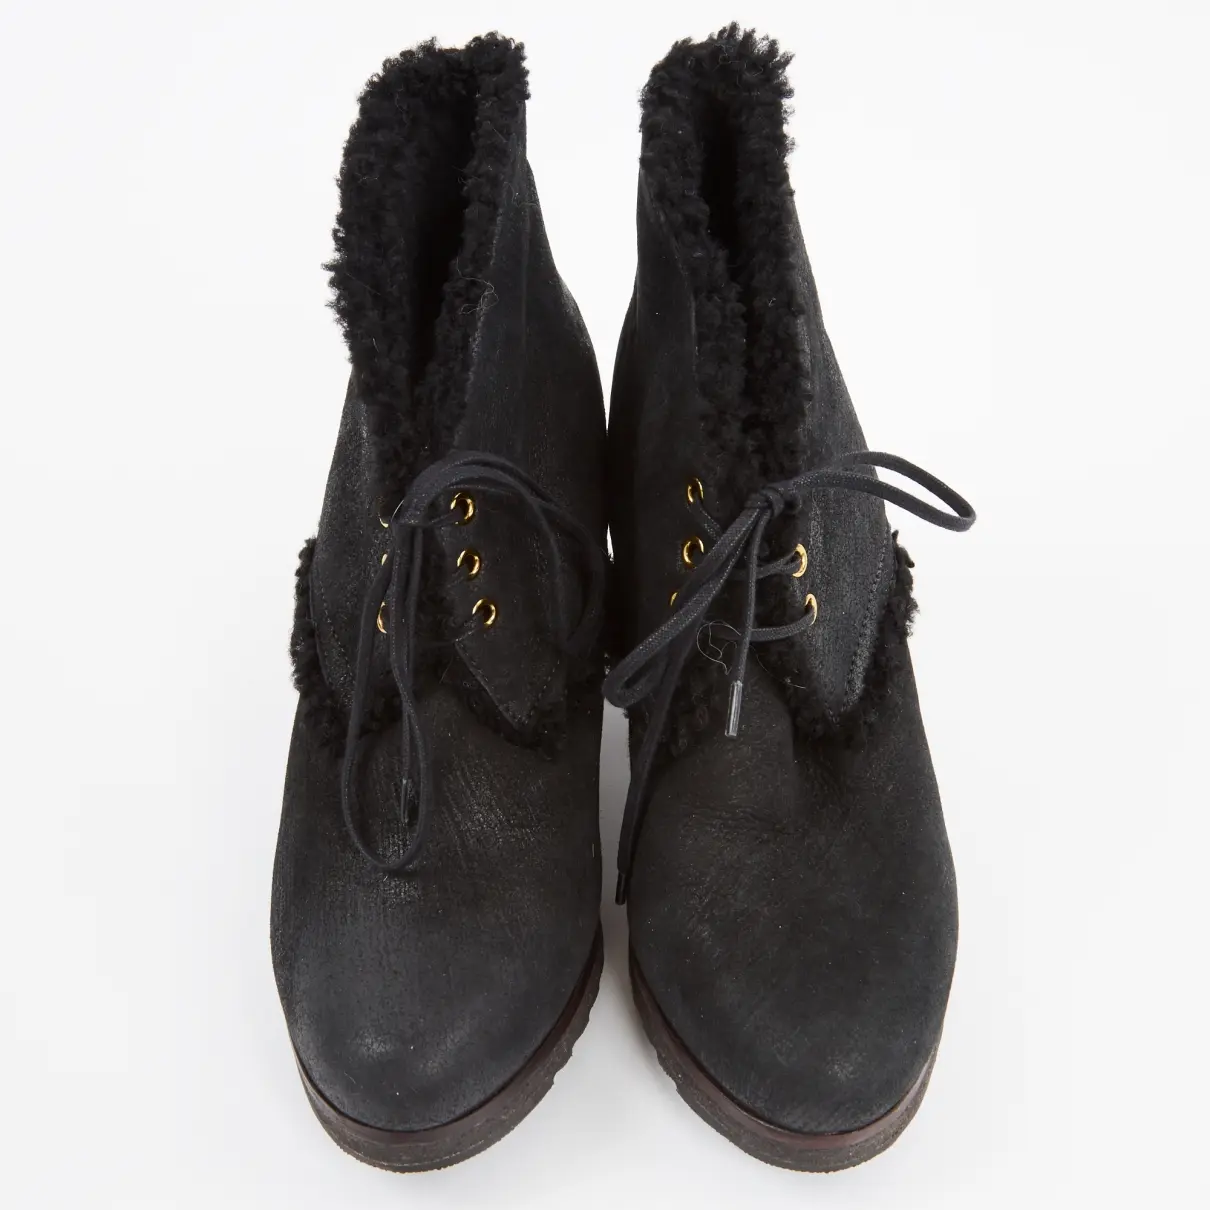 Buy Prada Shearling ankle boots online